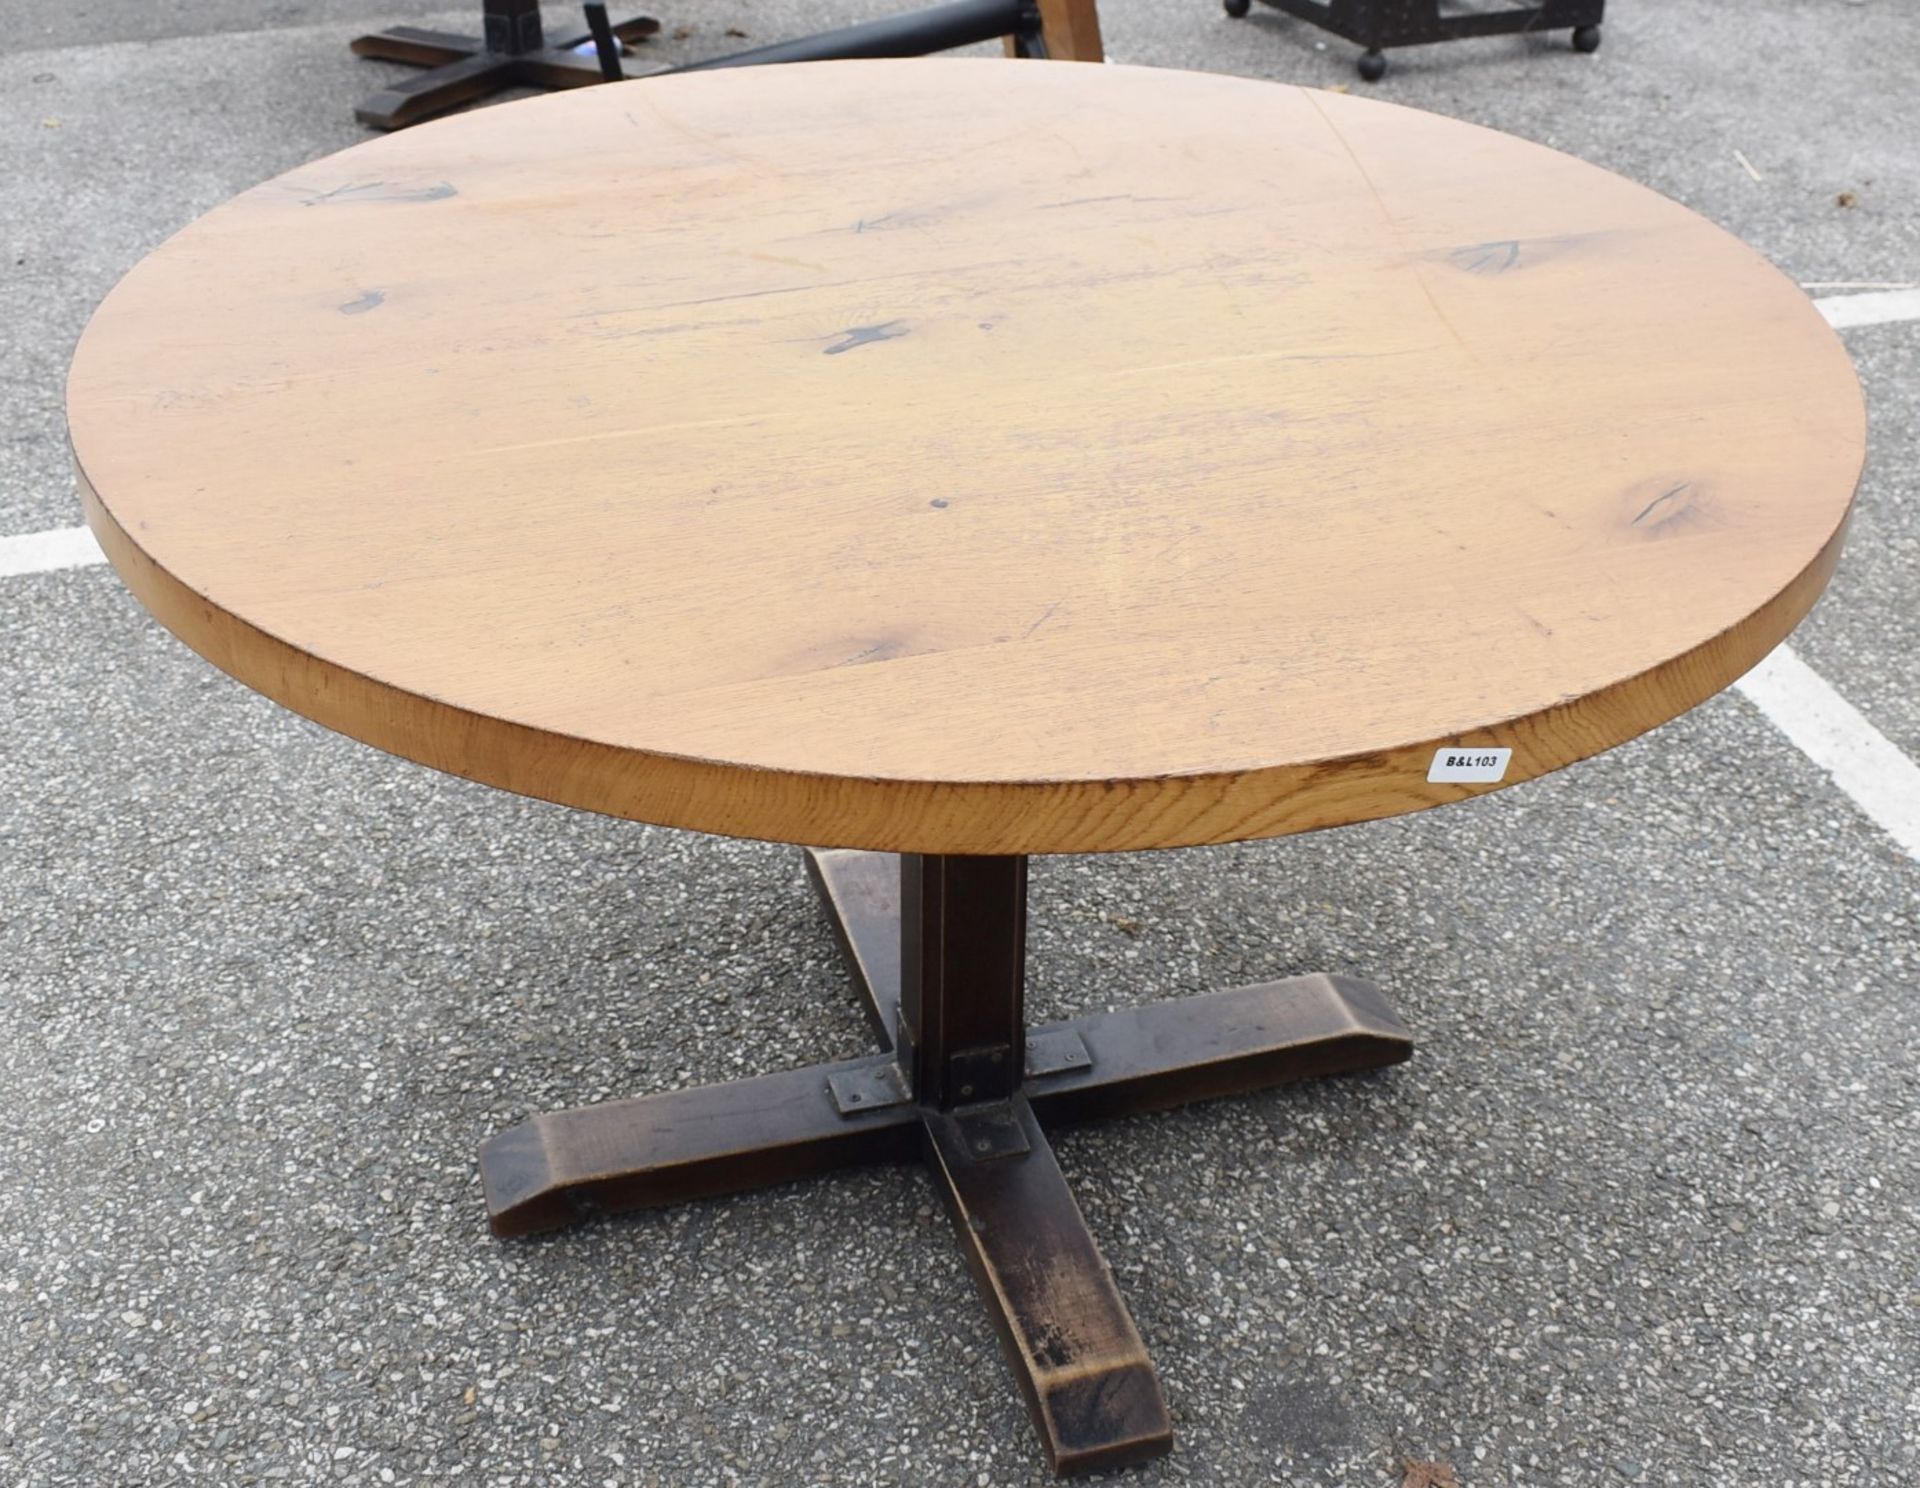 1 x Solid Oak 120cm Round Restaurant Table - Natural Rustic Knotty Oak Tops With Rustic Timber Base